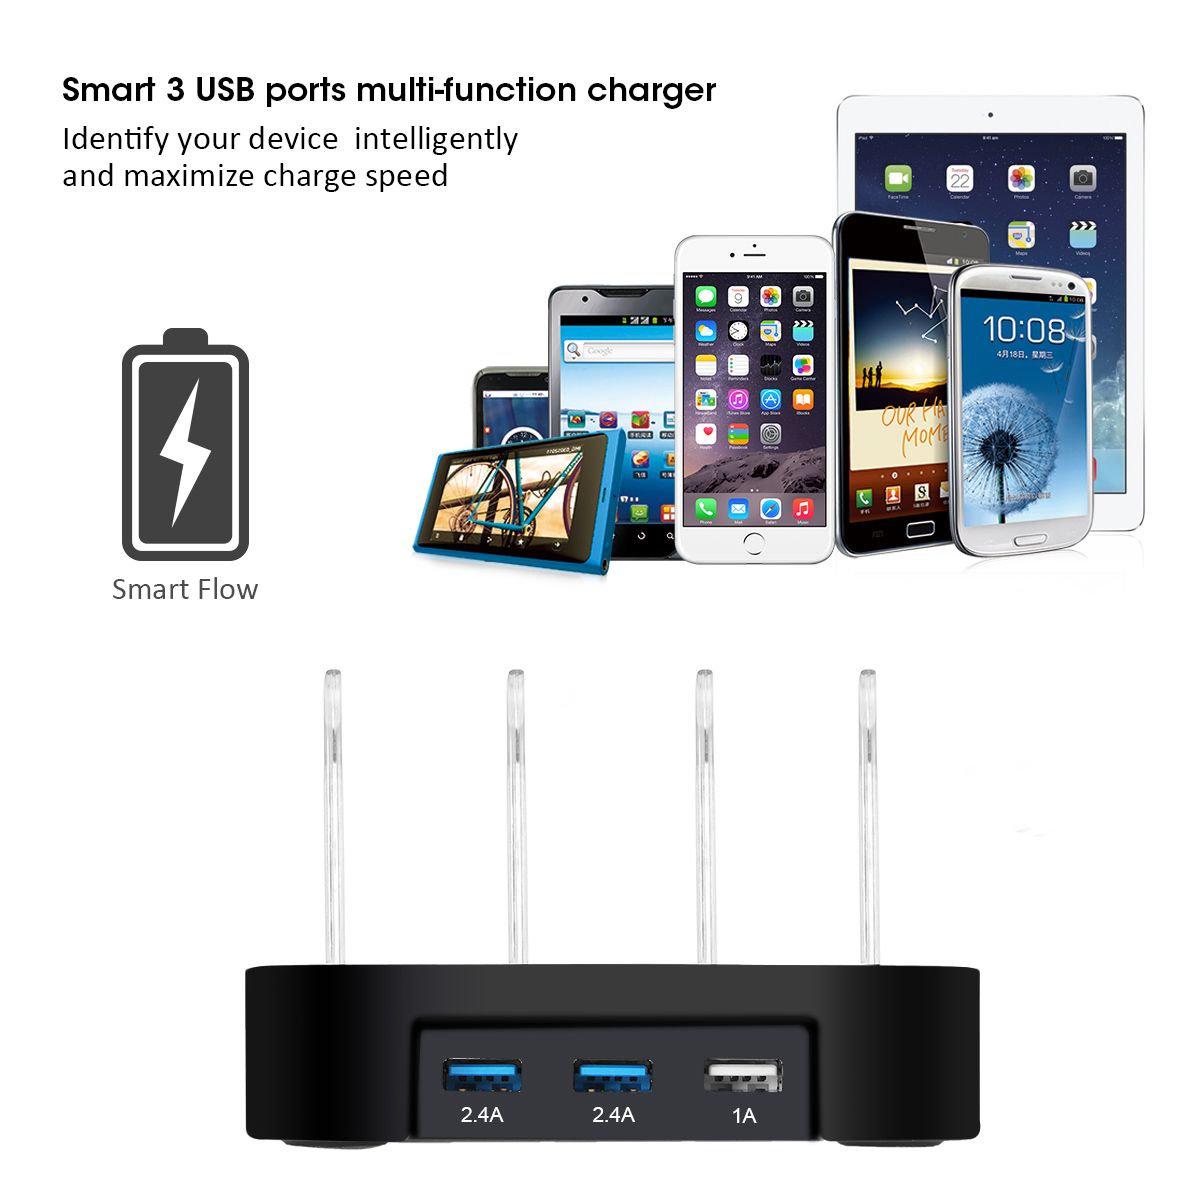 Multifunctional-3-USB-Port-Universal-Smart-Charger-Charging-Dock-for-Mobile-Phone-1127937